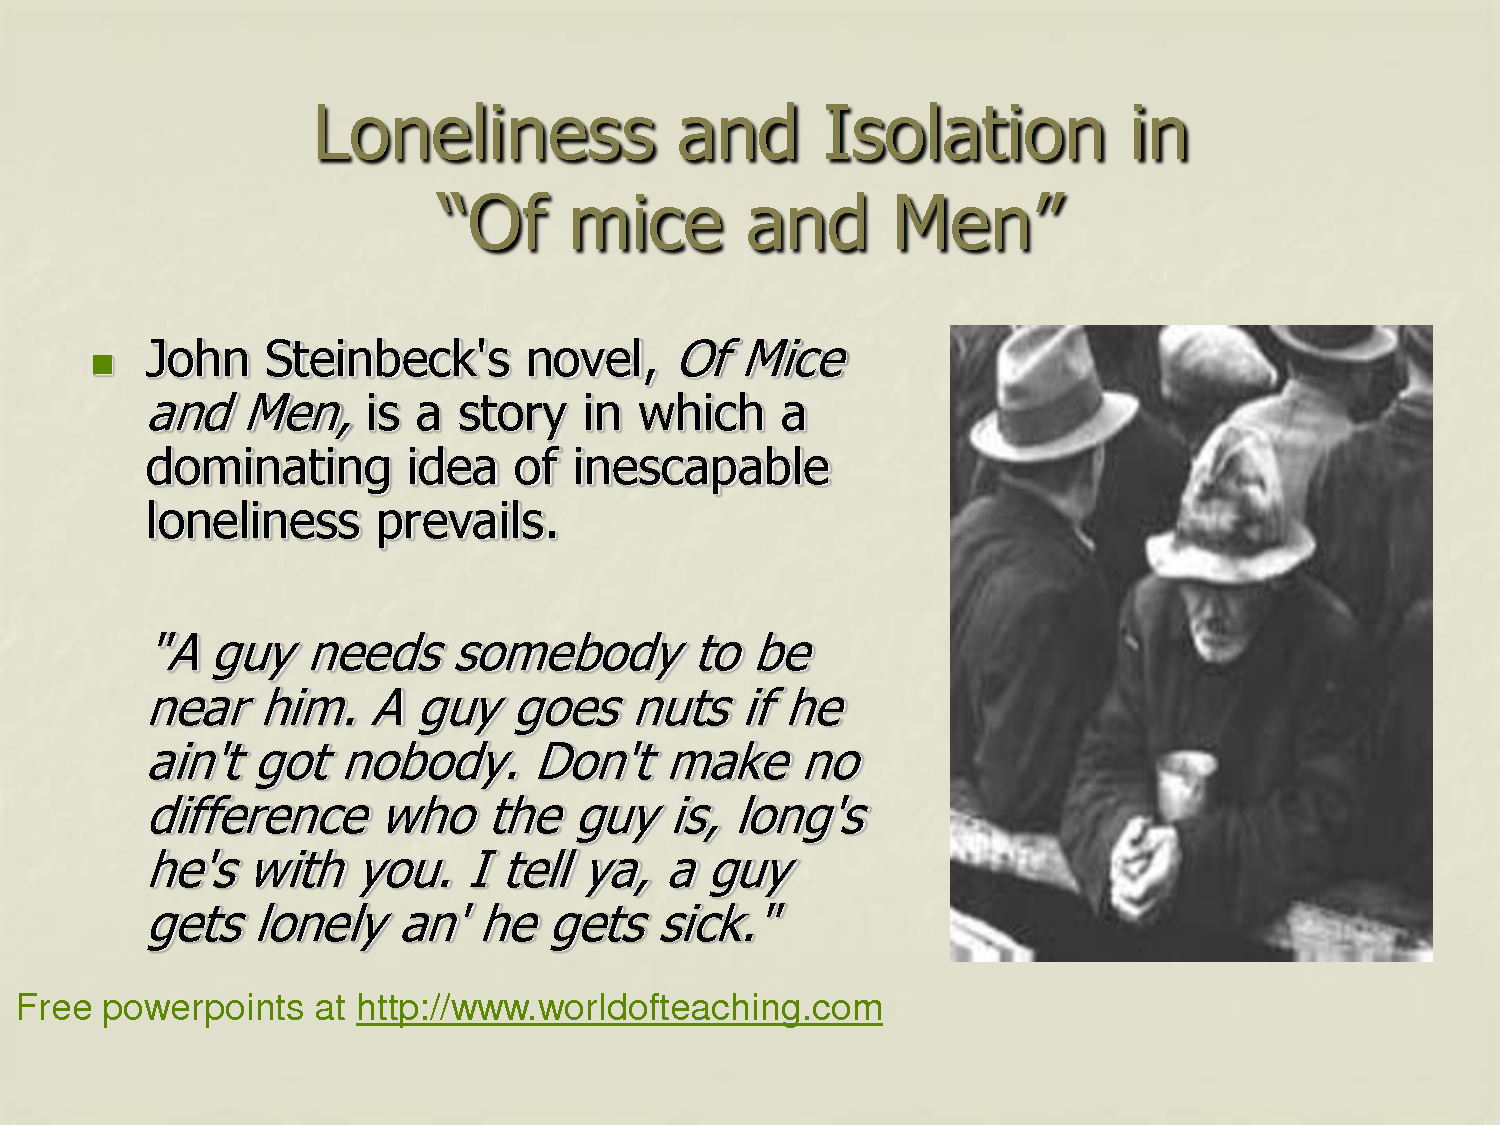 Friendship In Of Mice And Men